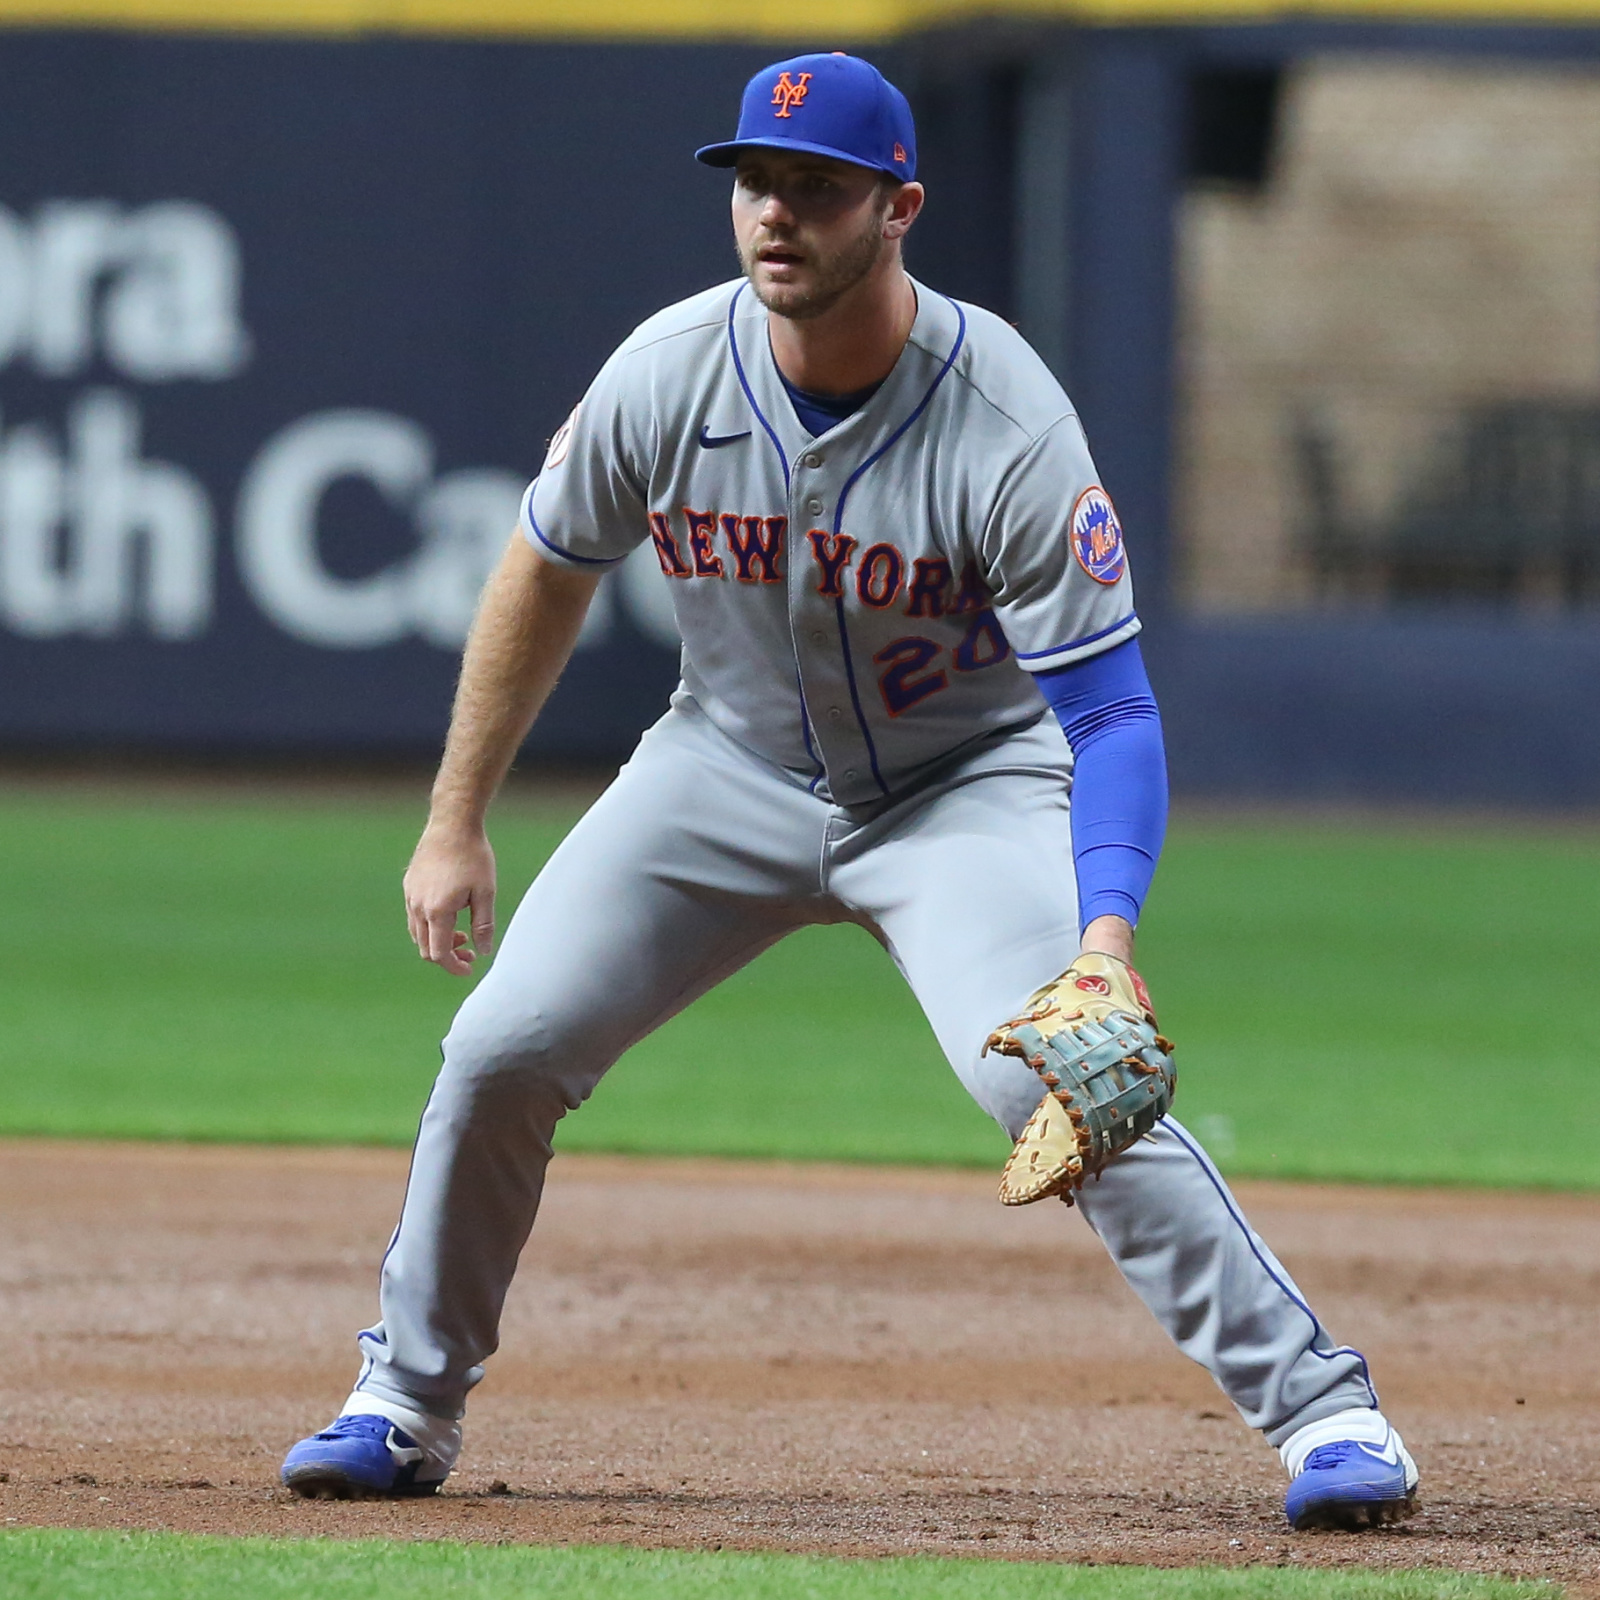 METS' PETE ALONSO TO HOST HOMERS FOR HEROES CHARITY EVENT AT MAIMONIDES  PARK ON SEPTEMBER 27, by New York Mets